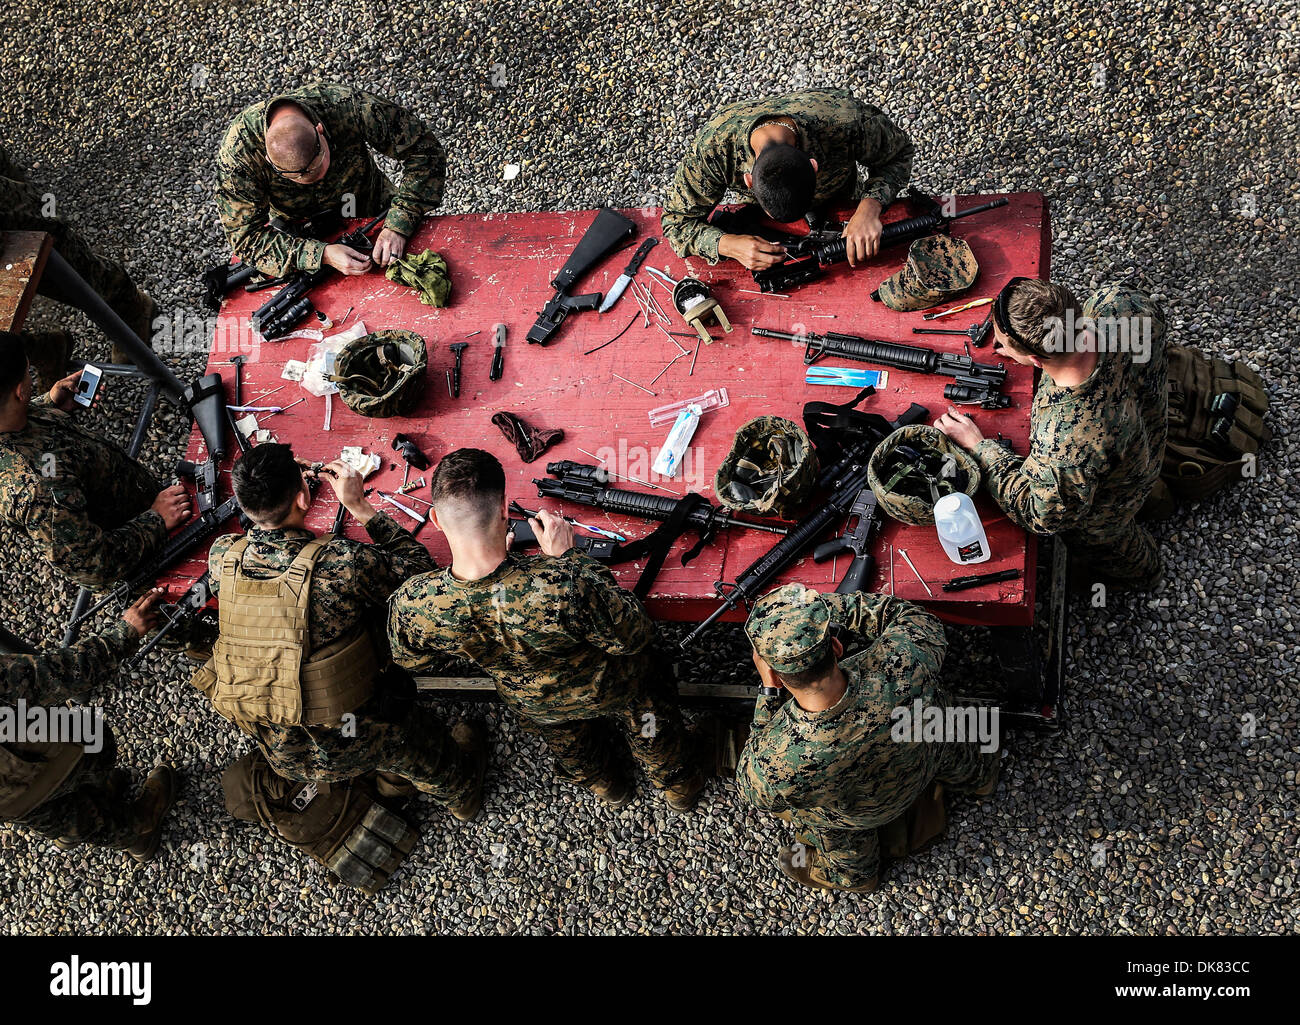 US Marines with the 15th Marine Expeditionary Unit clean their weapons after completing a small-arms training exercise at Marine Corps Base Camp Pendleton November 25, 2013 in Pendleton, CA. Stock Photo